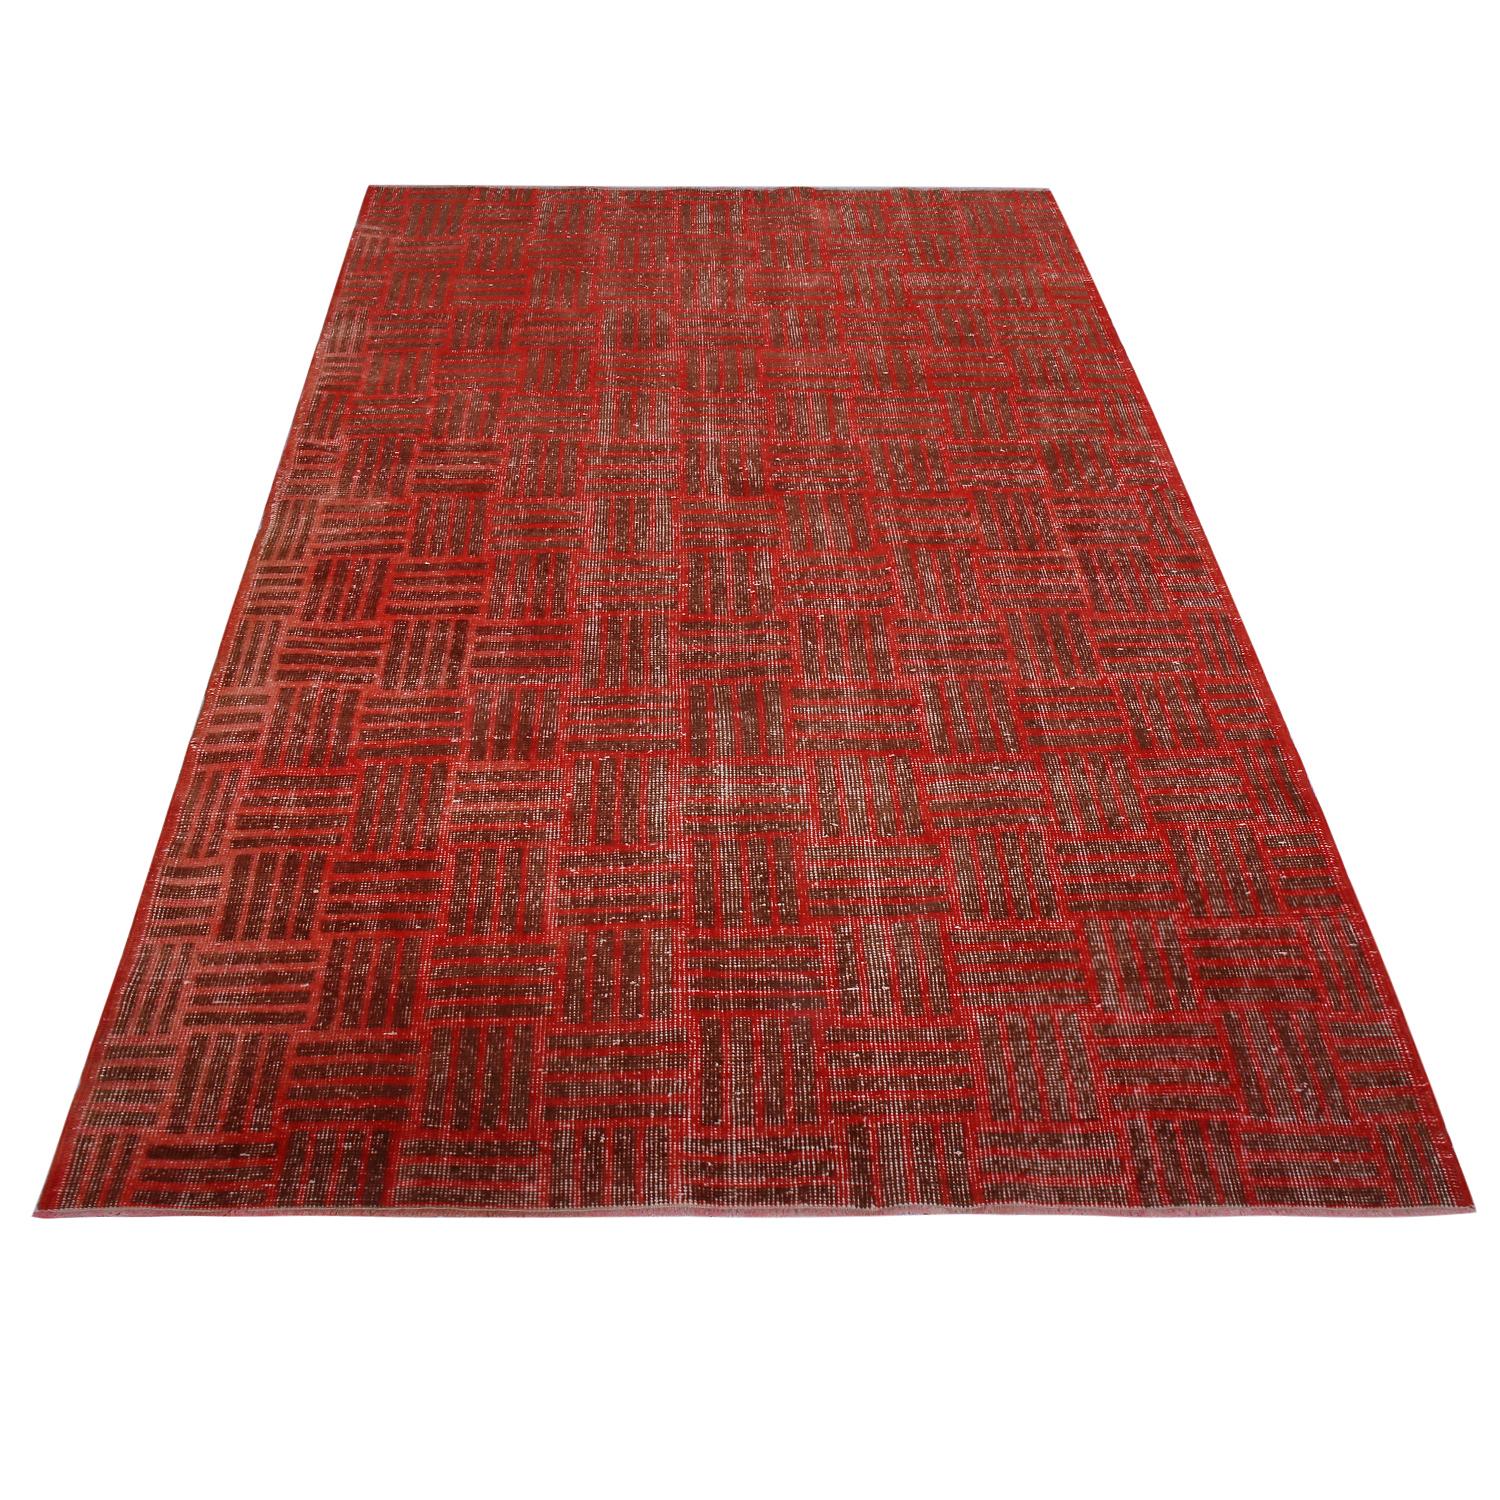 Hand knotted in Turkey originating between 1960-1970, this vintage midcentury runner joins Rug & Kilim’s midcentury Pasha collection celebrating Turkish icon Zeki Müren with Josh’s hand picked favorites from this period. Enjoying a very light,